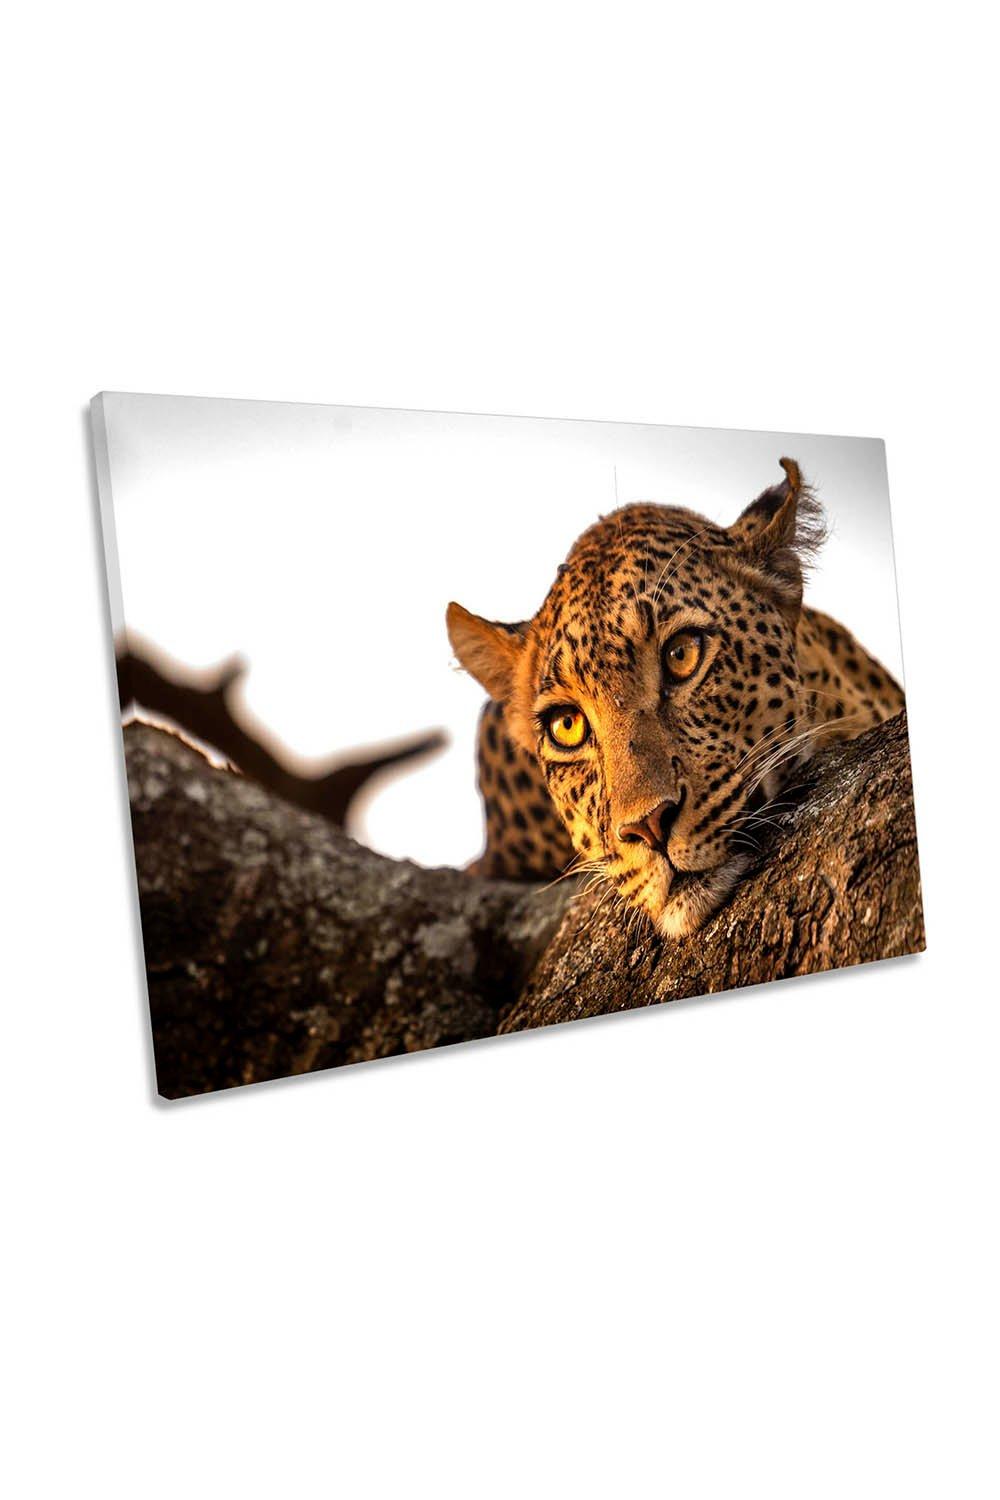 Leopard Eyes Wildlife Africa Canvas Wall Art Picture Print